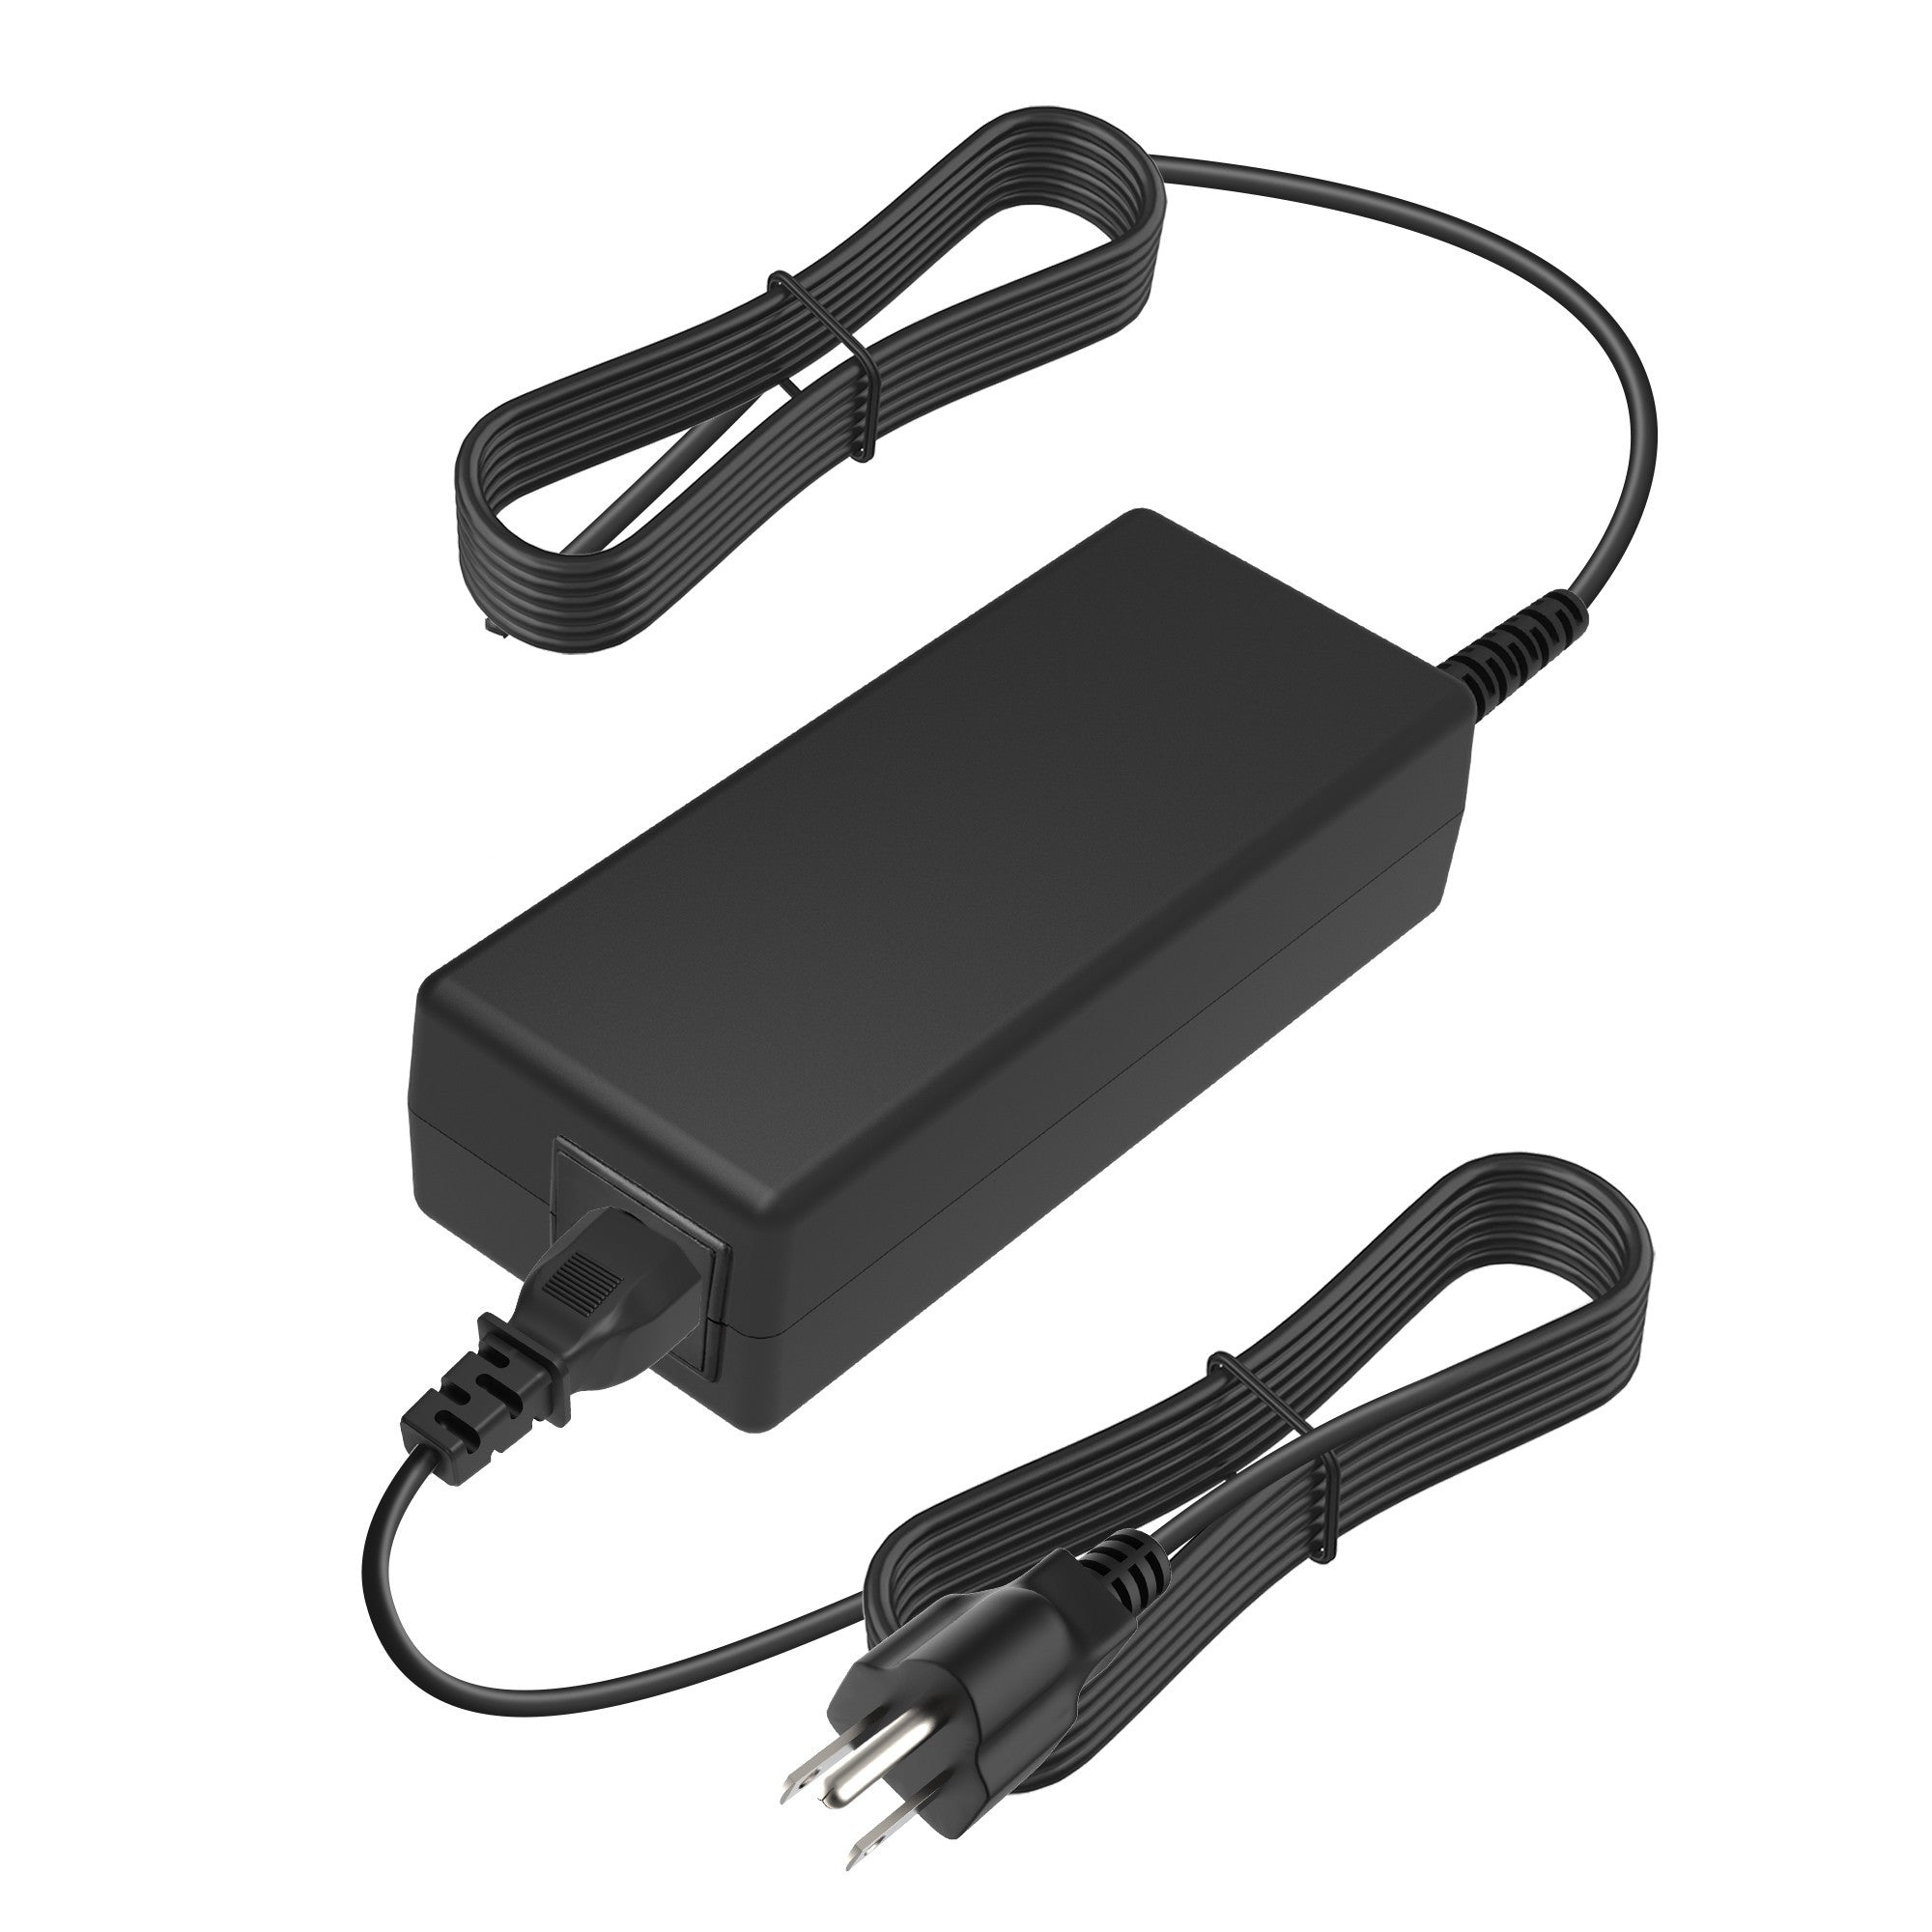 AbleGrid 16V 5A AC Adapter Compatible with IBM THINKPAD 240X 365XD LAPTOP Charger Power SUPPLY Cord PSU NEW